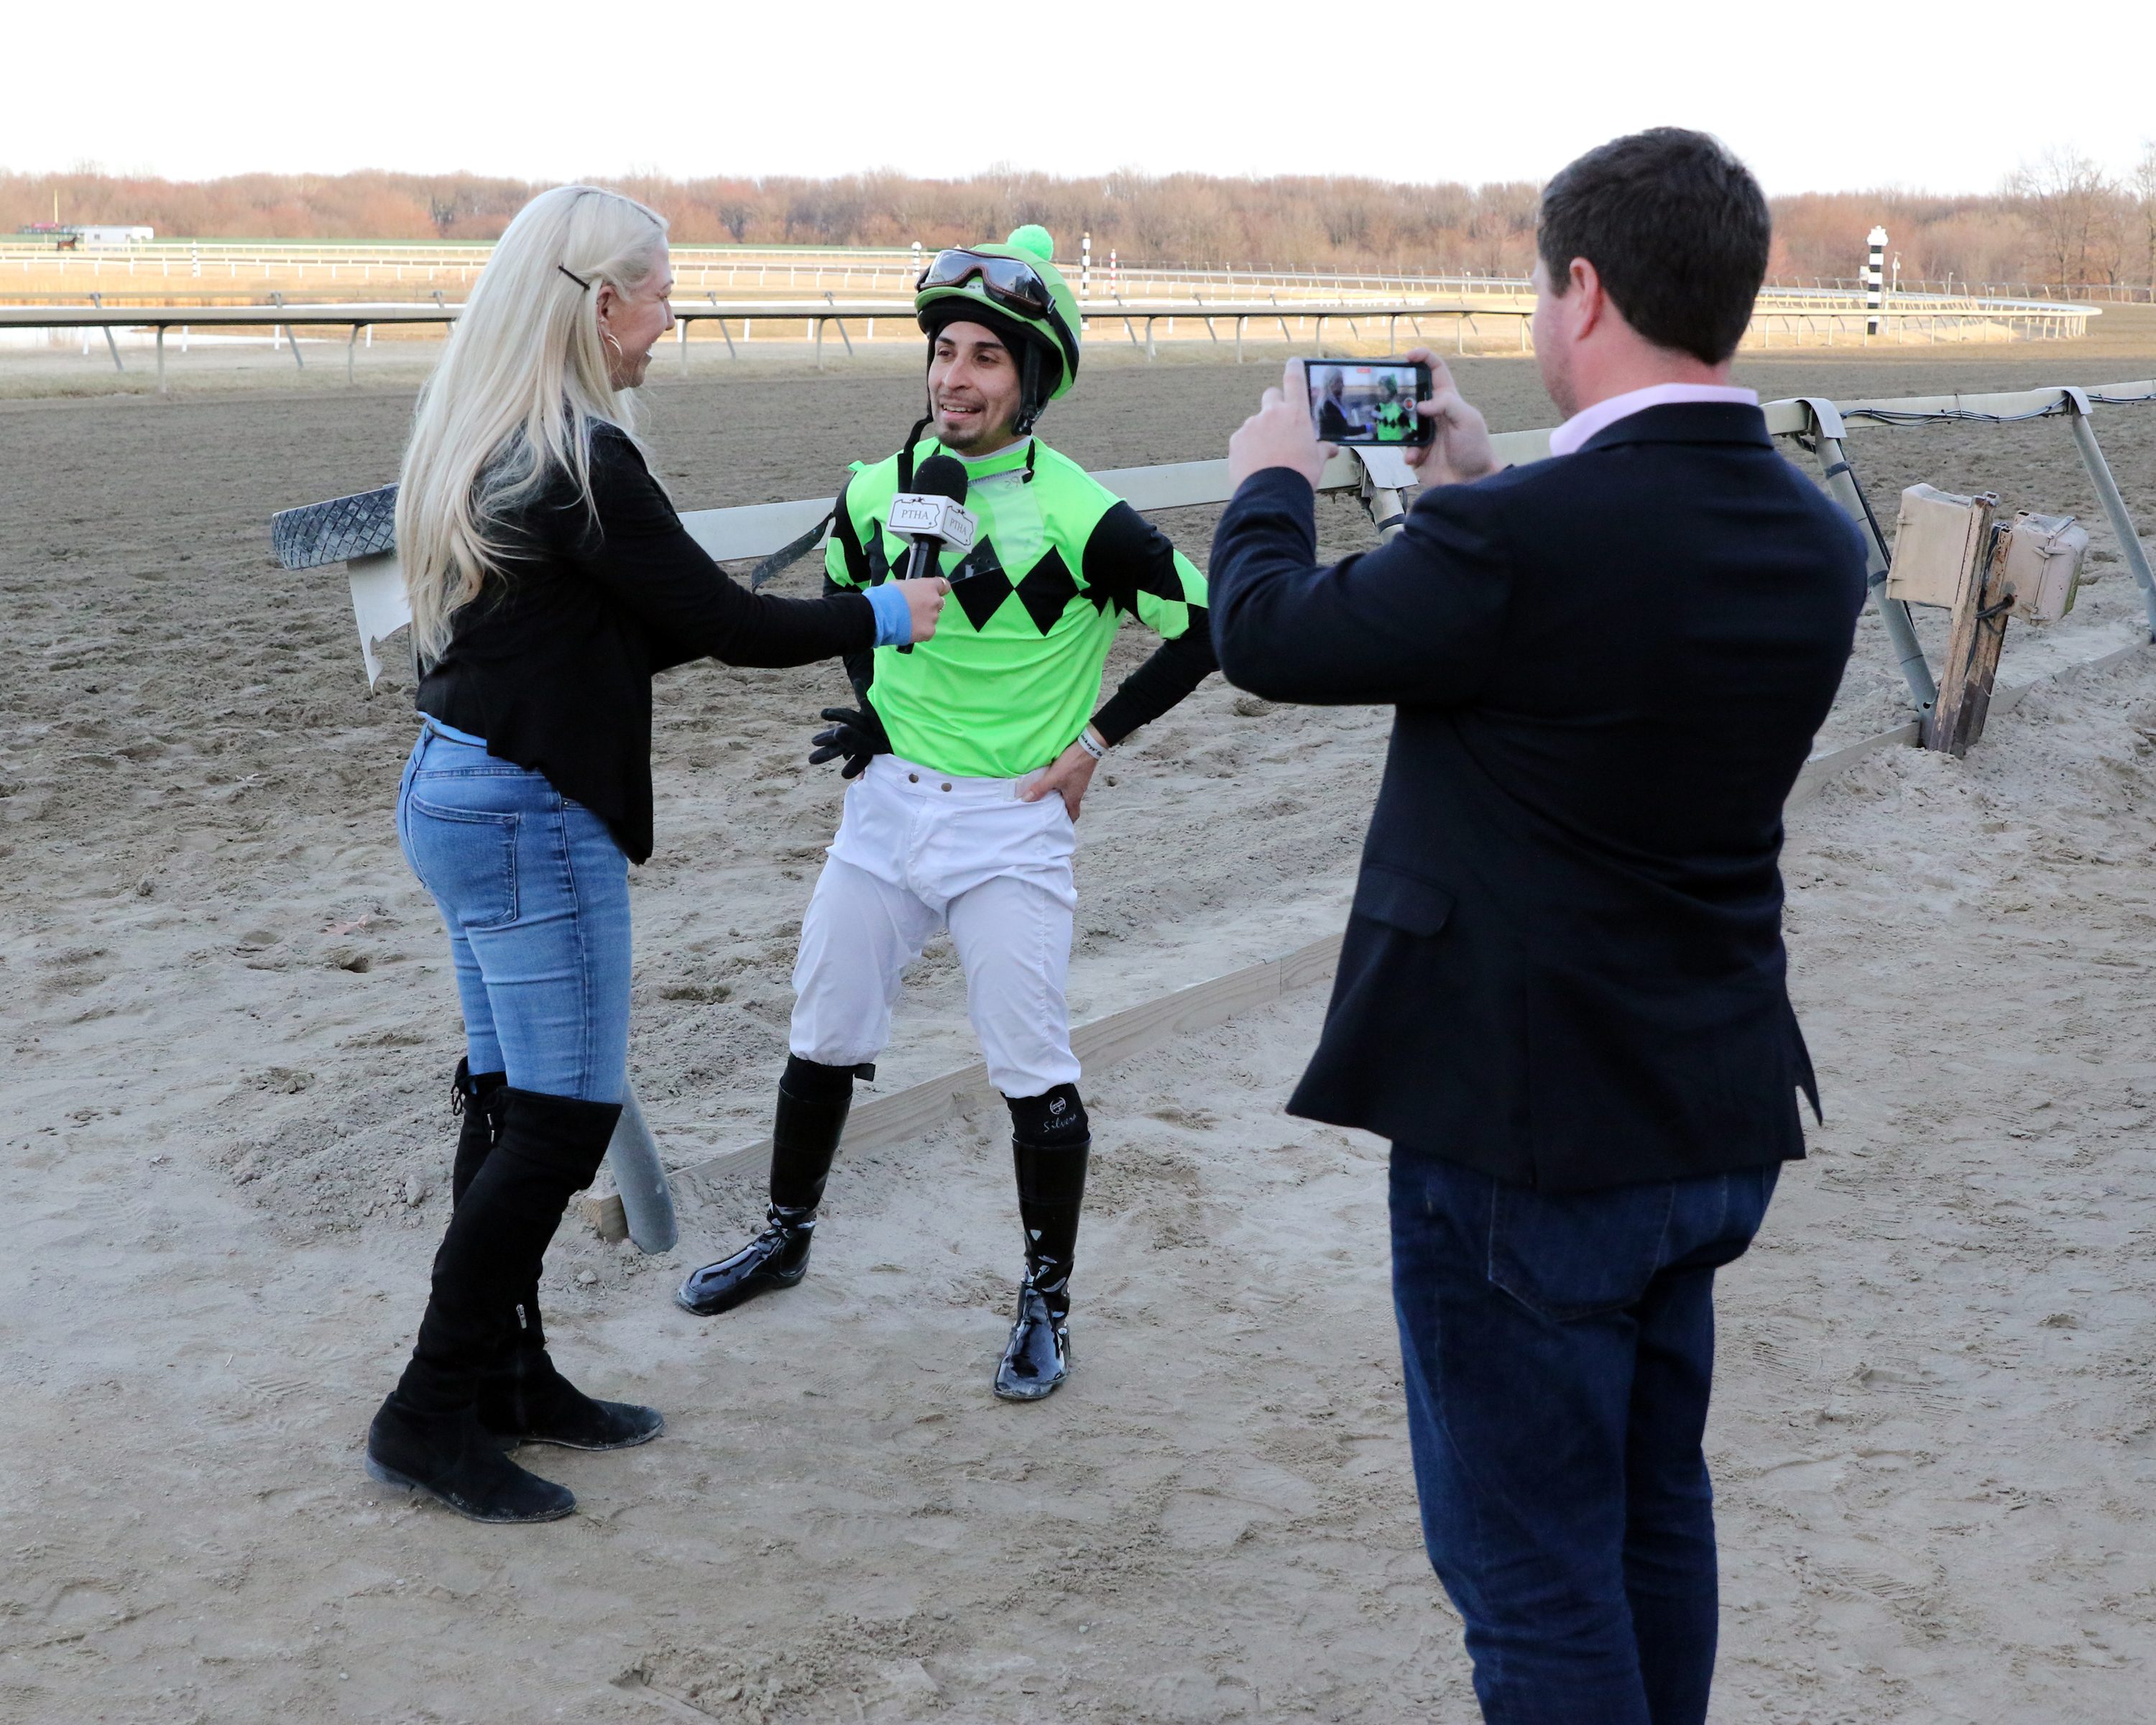 Dani Gibson with the PTHA interviews Ruben Silvera after Twisted Ride wins The City of Brotherly Love at Parx on March 8, 2022. Photo By: Chad B. Harmon